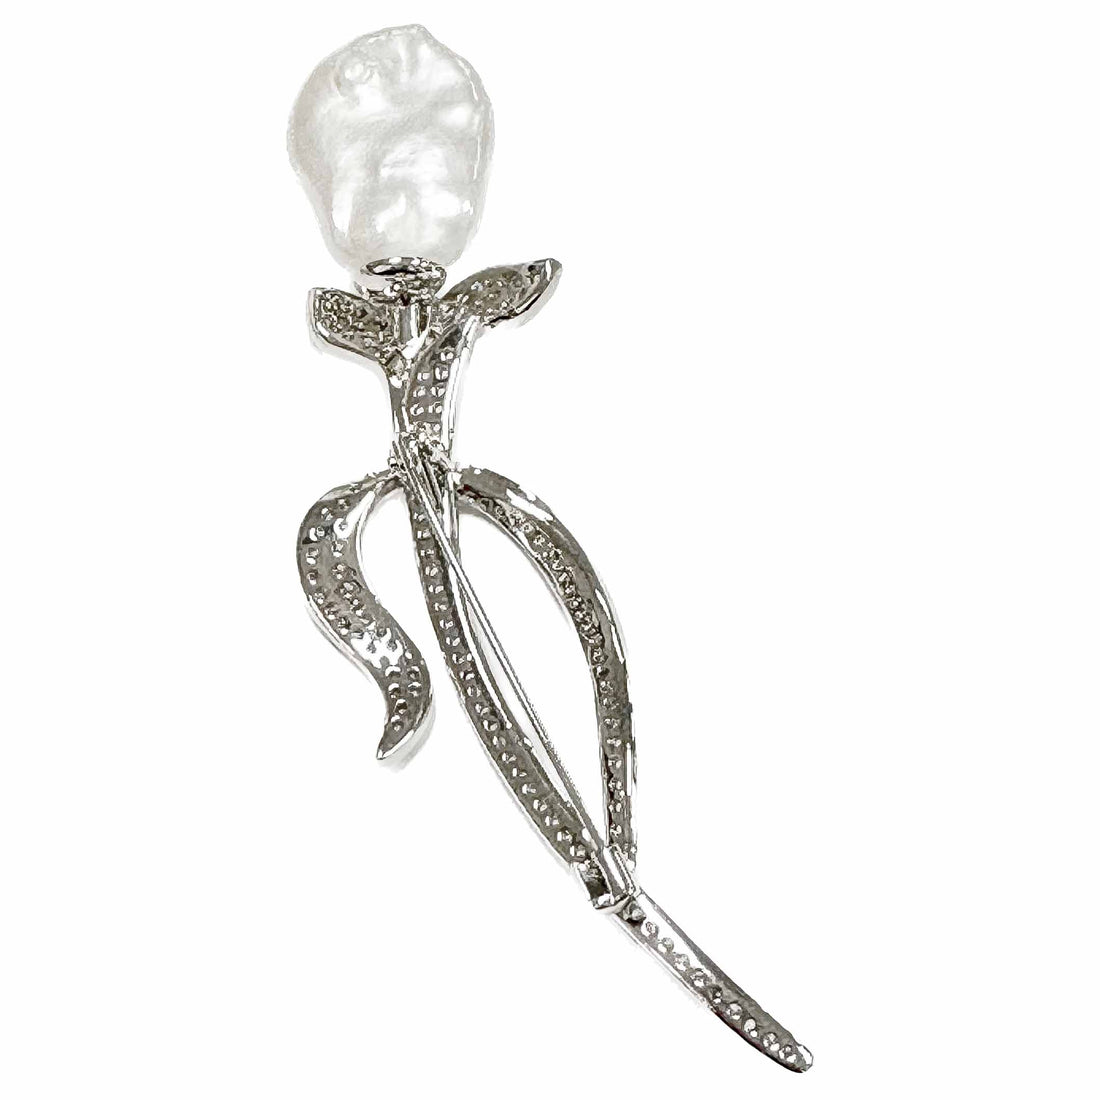 Brooch - Pin Rhinestone Large Baroque Pearl Silver Plated